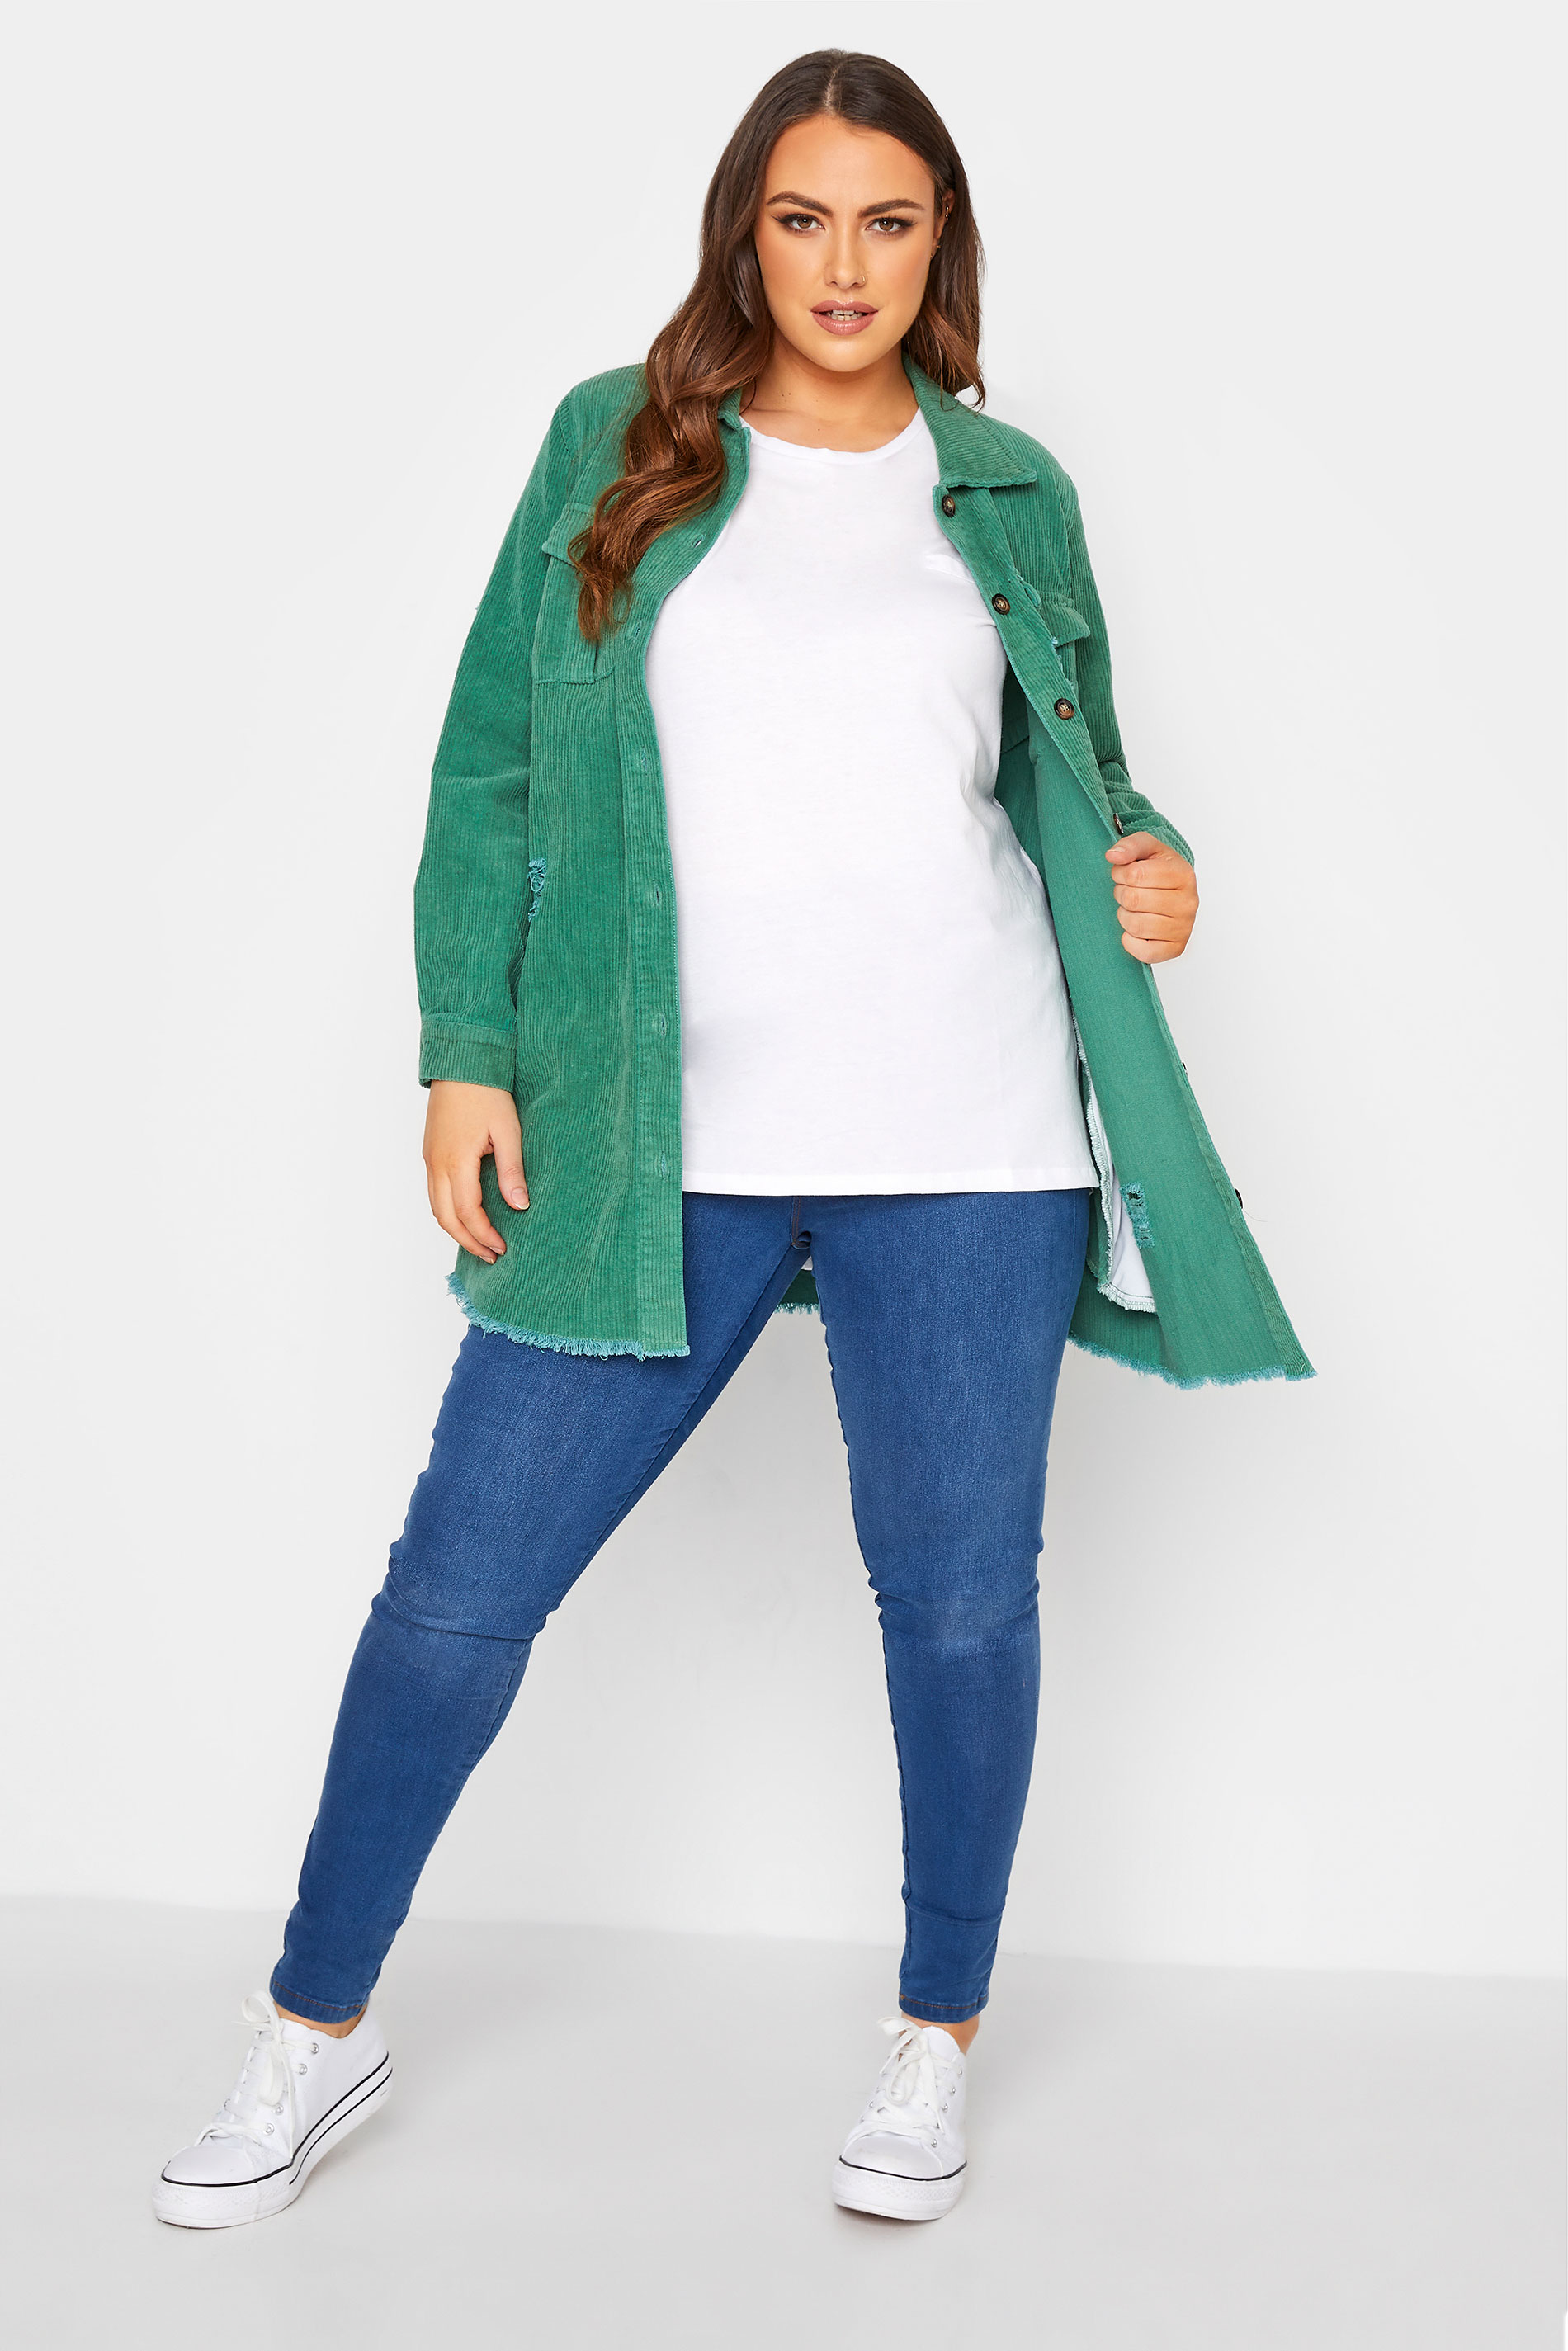 Grande taille  Tops Grande taille  Tops Casual | YOURS FOR GOOD - T-Shirt Blanc en Coton Mixte - CP12932